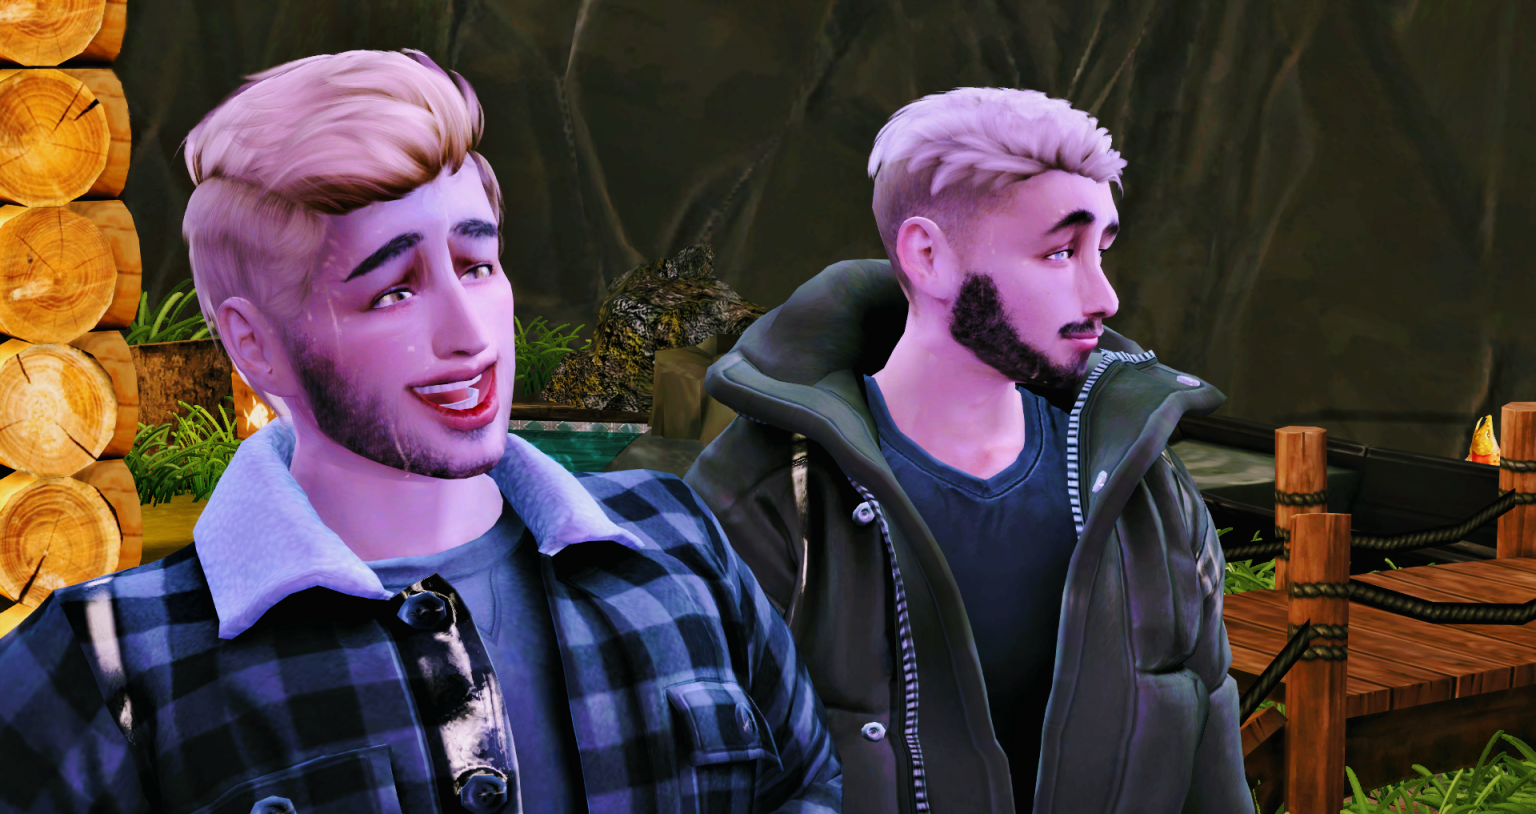 sims 4 wicked whim mod download